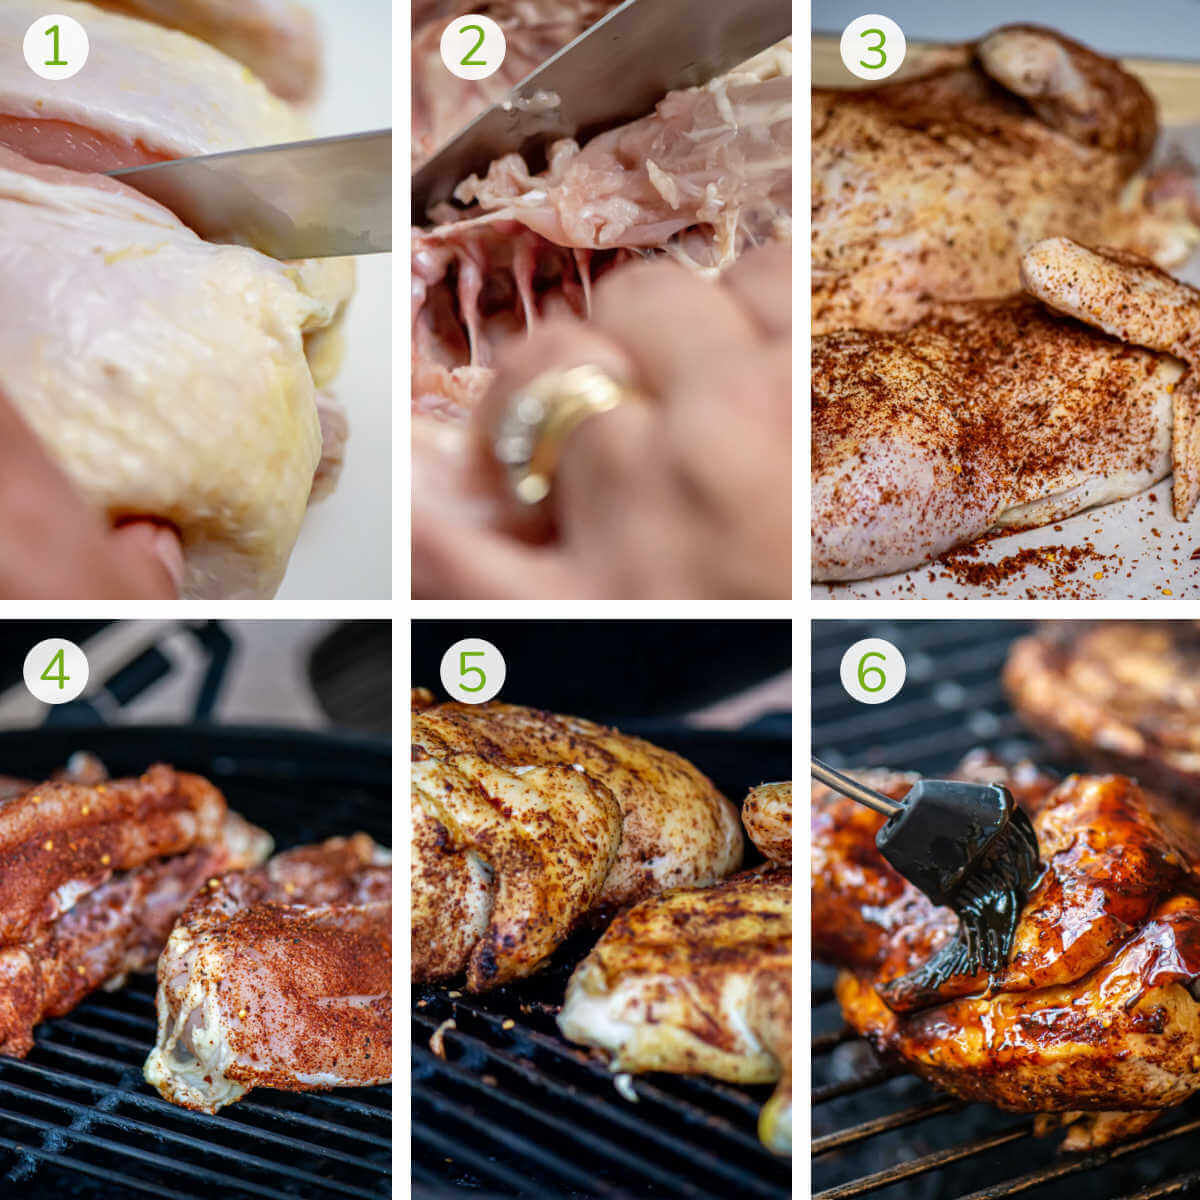 process photos showing how to cut the chicken in half, season it, grill, and brush with a homemade BBQ sauce.